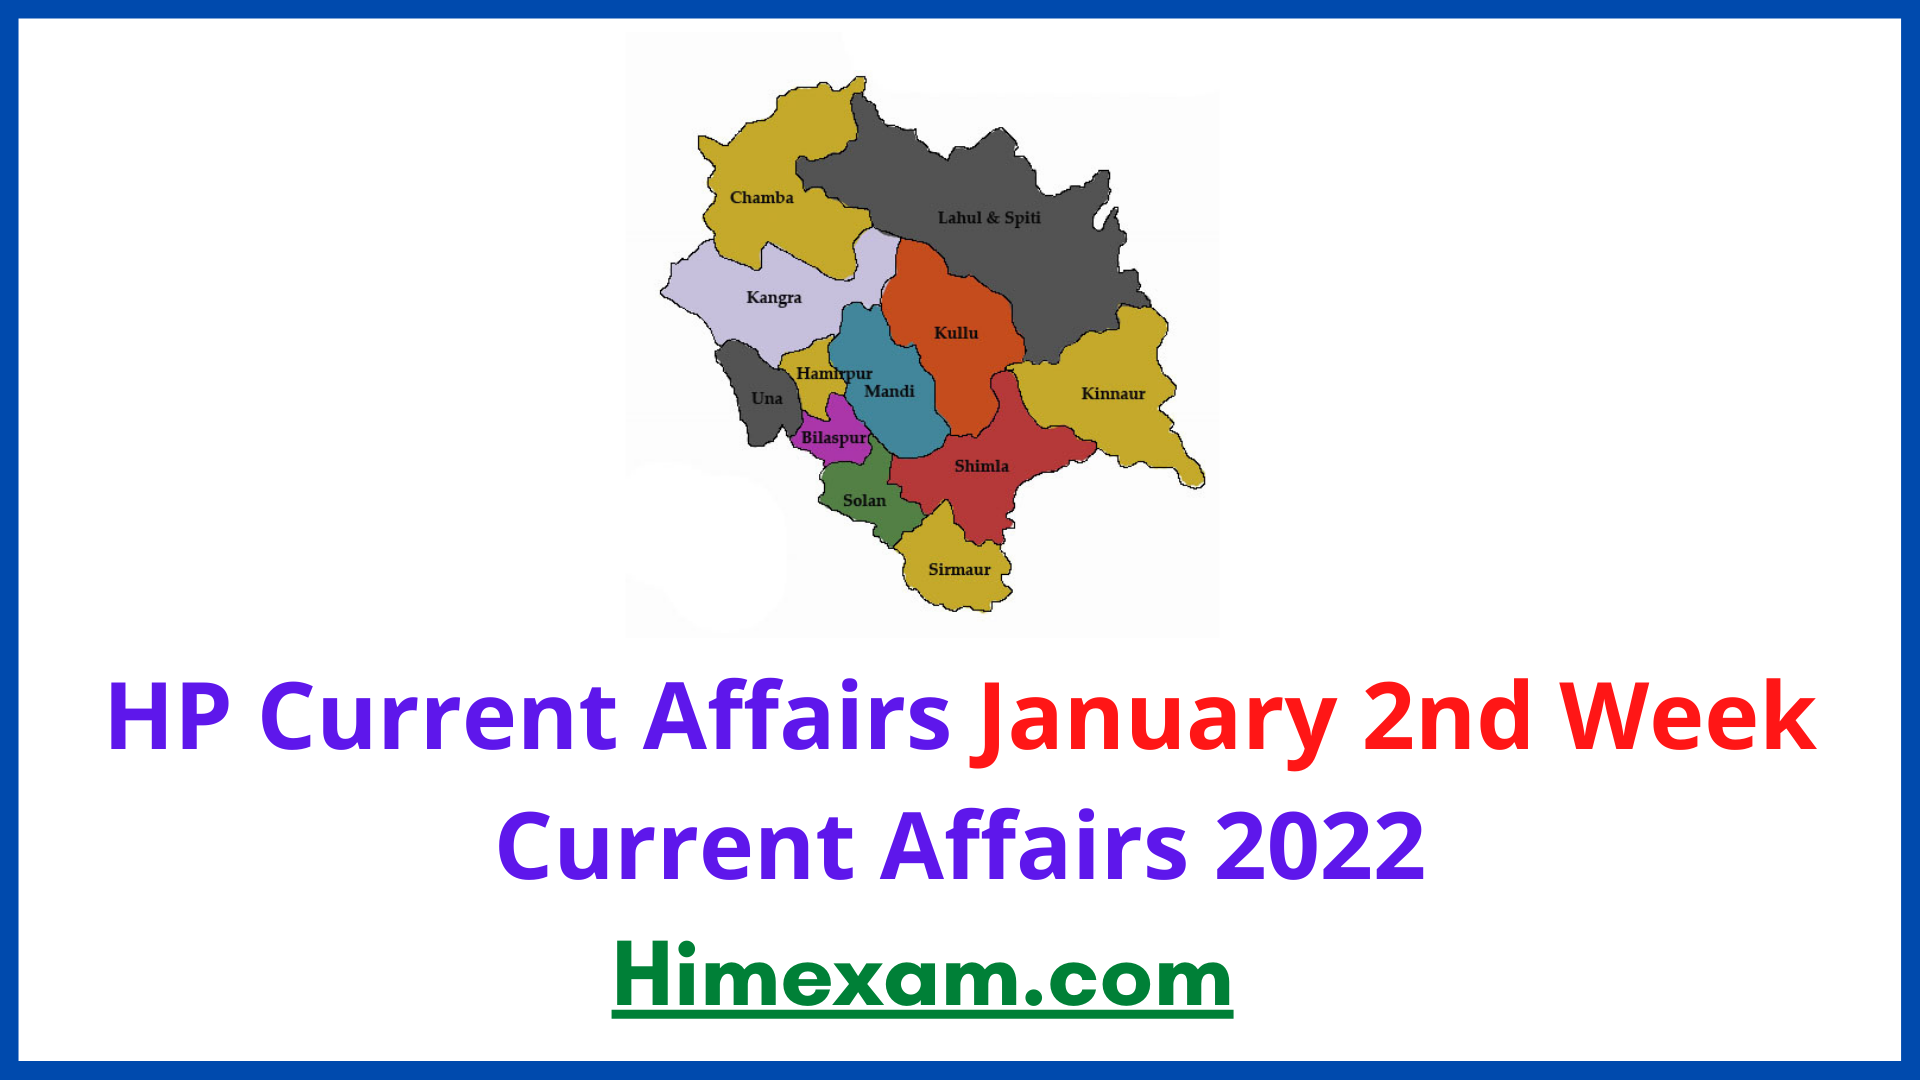 HP Current Affairs January 2nd Week Current Affairs 2022